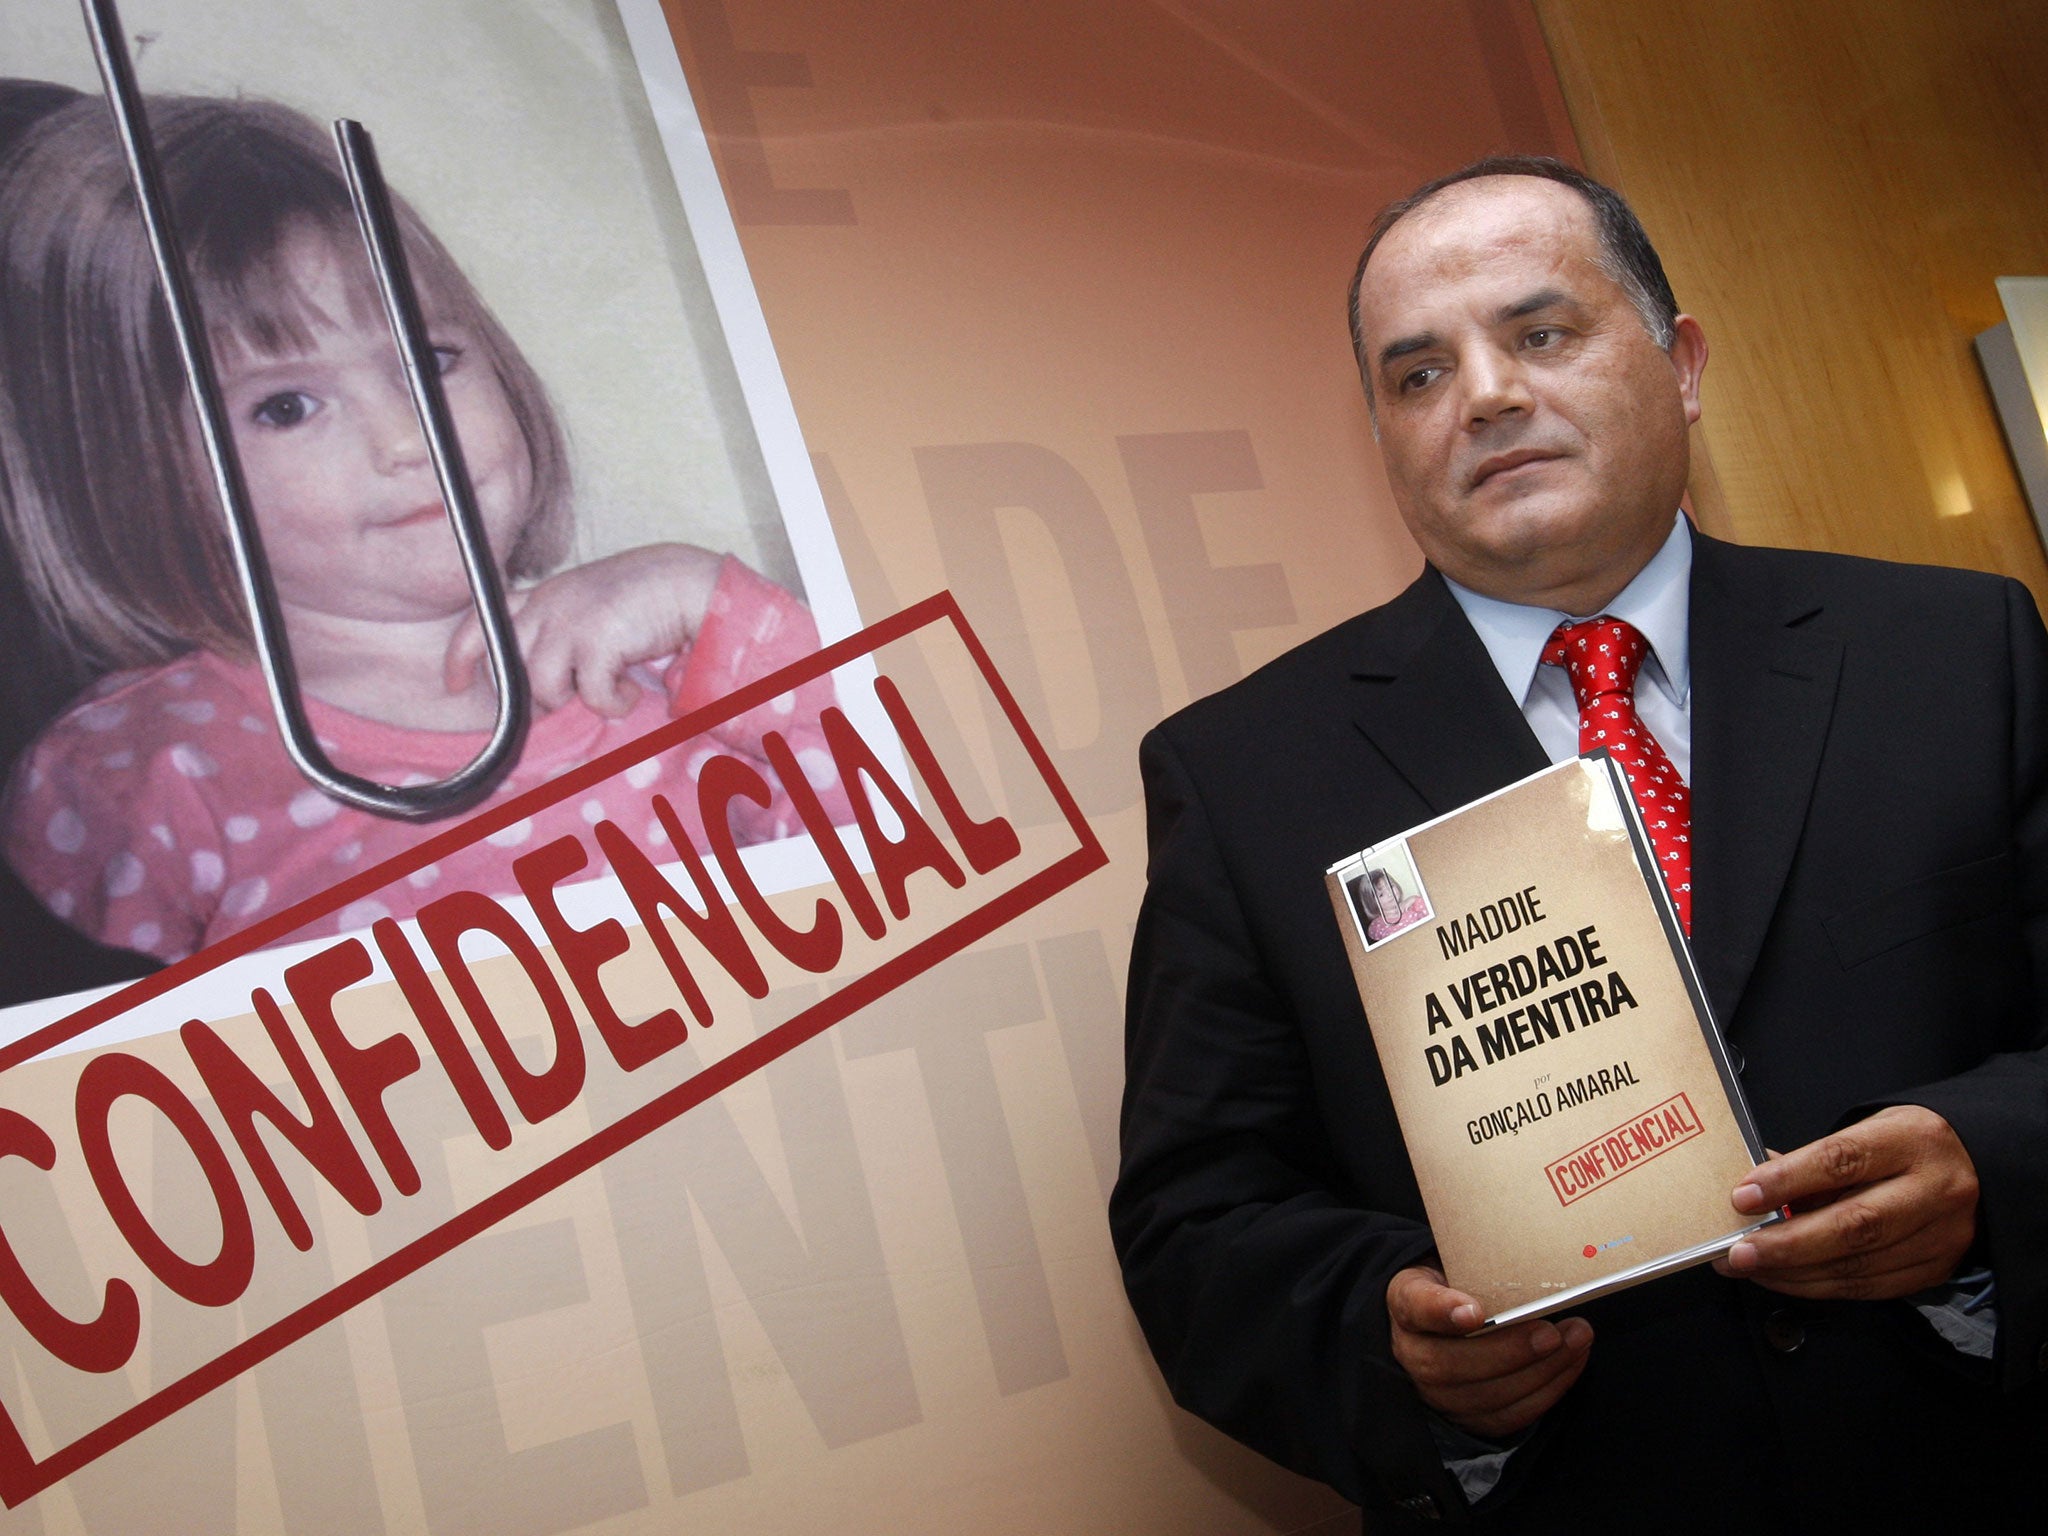 Former detective Goncalo Amaral poses with his book during its launch in Lisbon in 2008